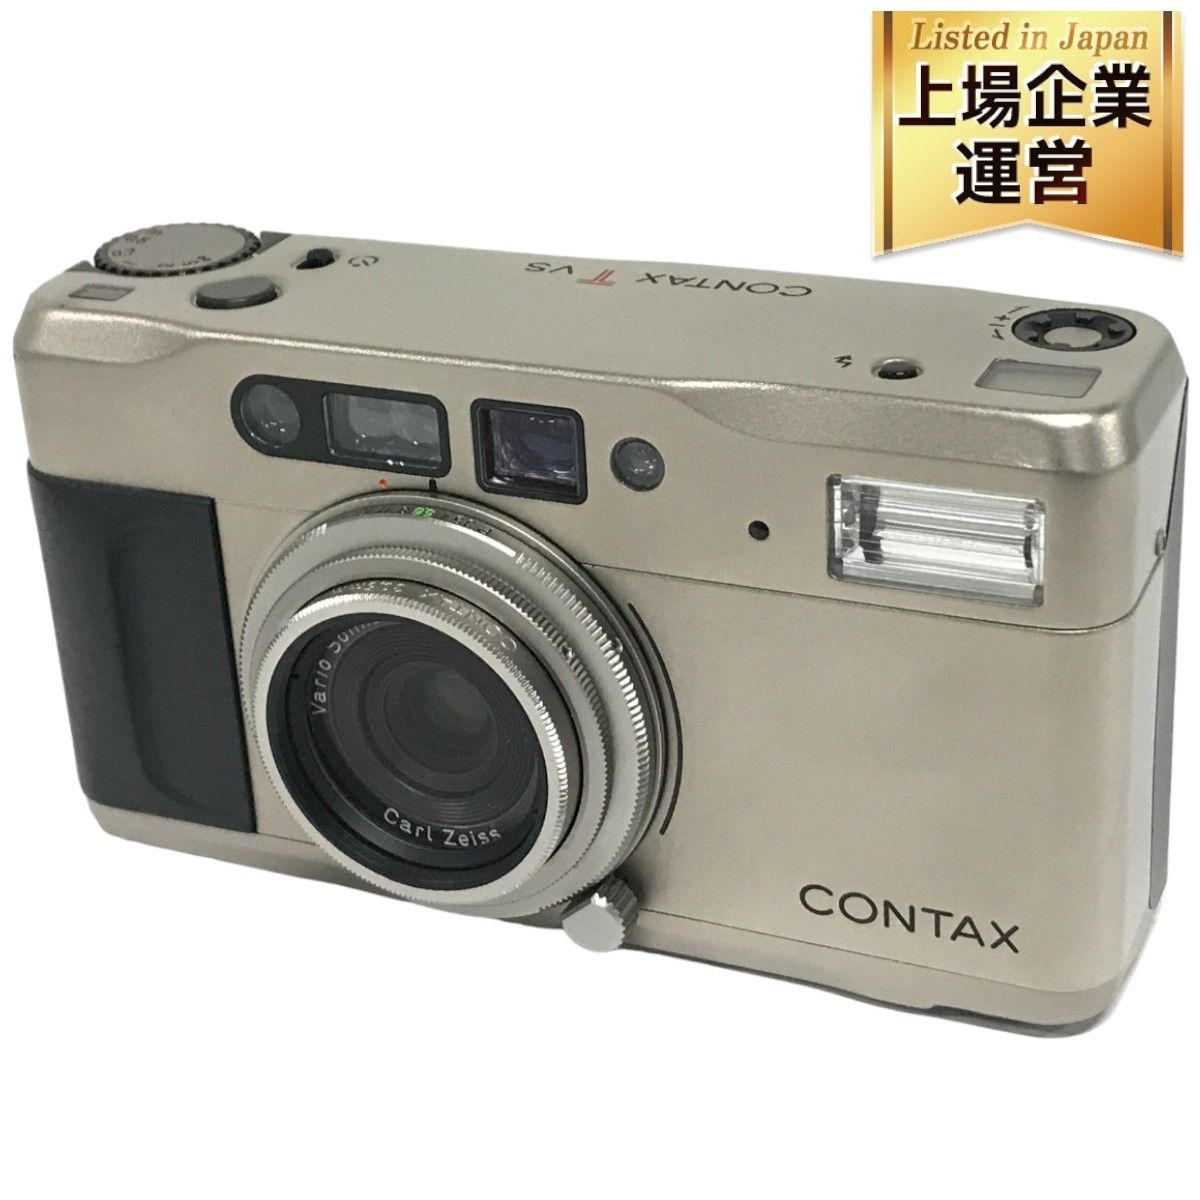 CONTAX TVS Vario Sonnar 3.5-6.5/28-56 Carl Zeiss コンパクト フィルムカメラ コンタックス  F9007854